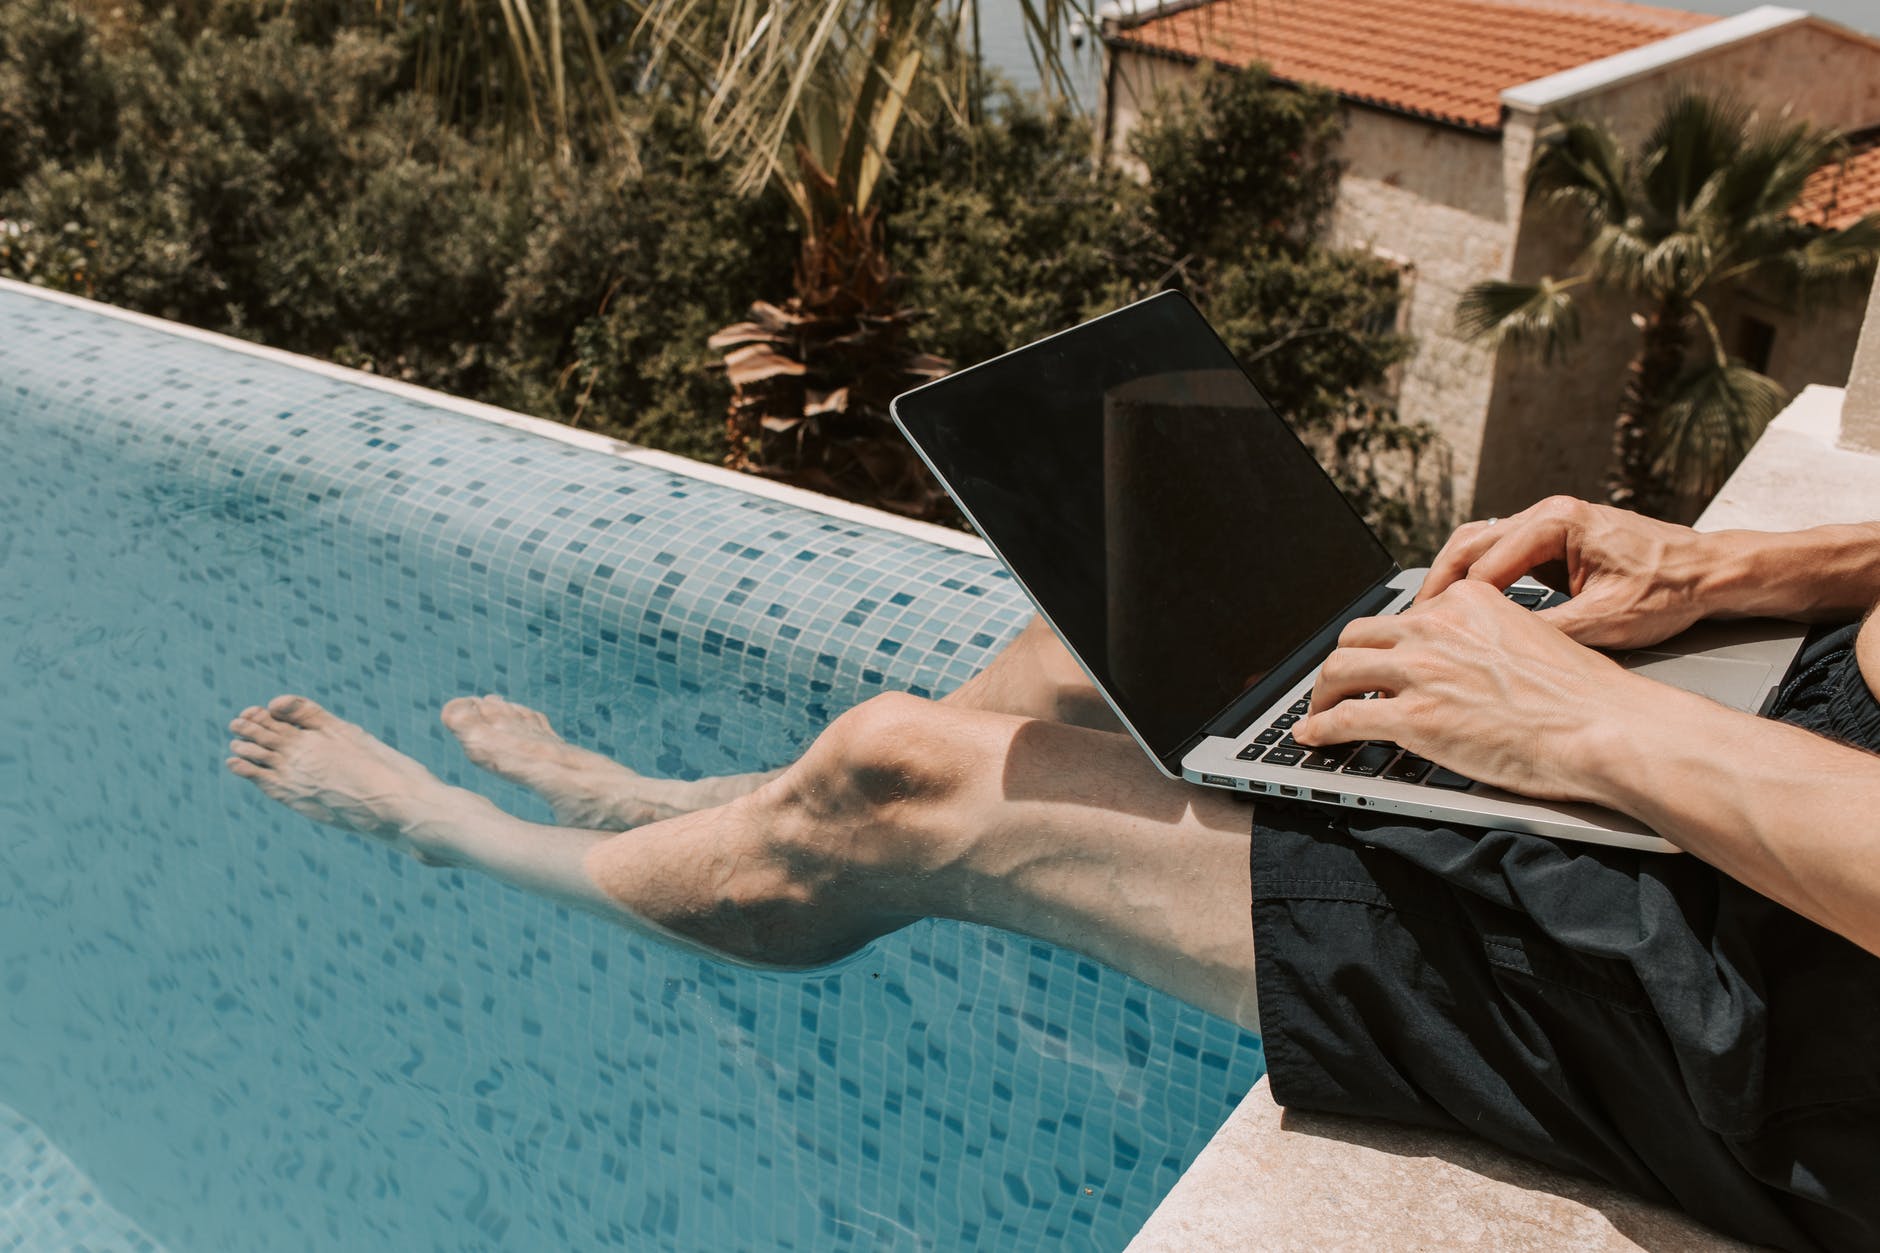 Crop photo of man dangling his legs into a swimming pool while using a laptop.